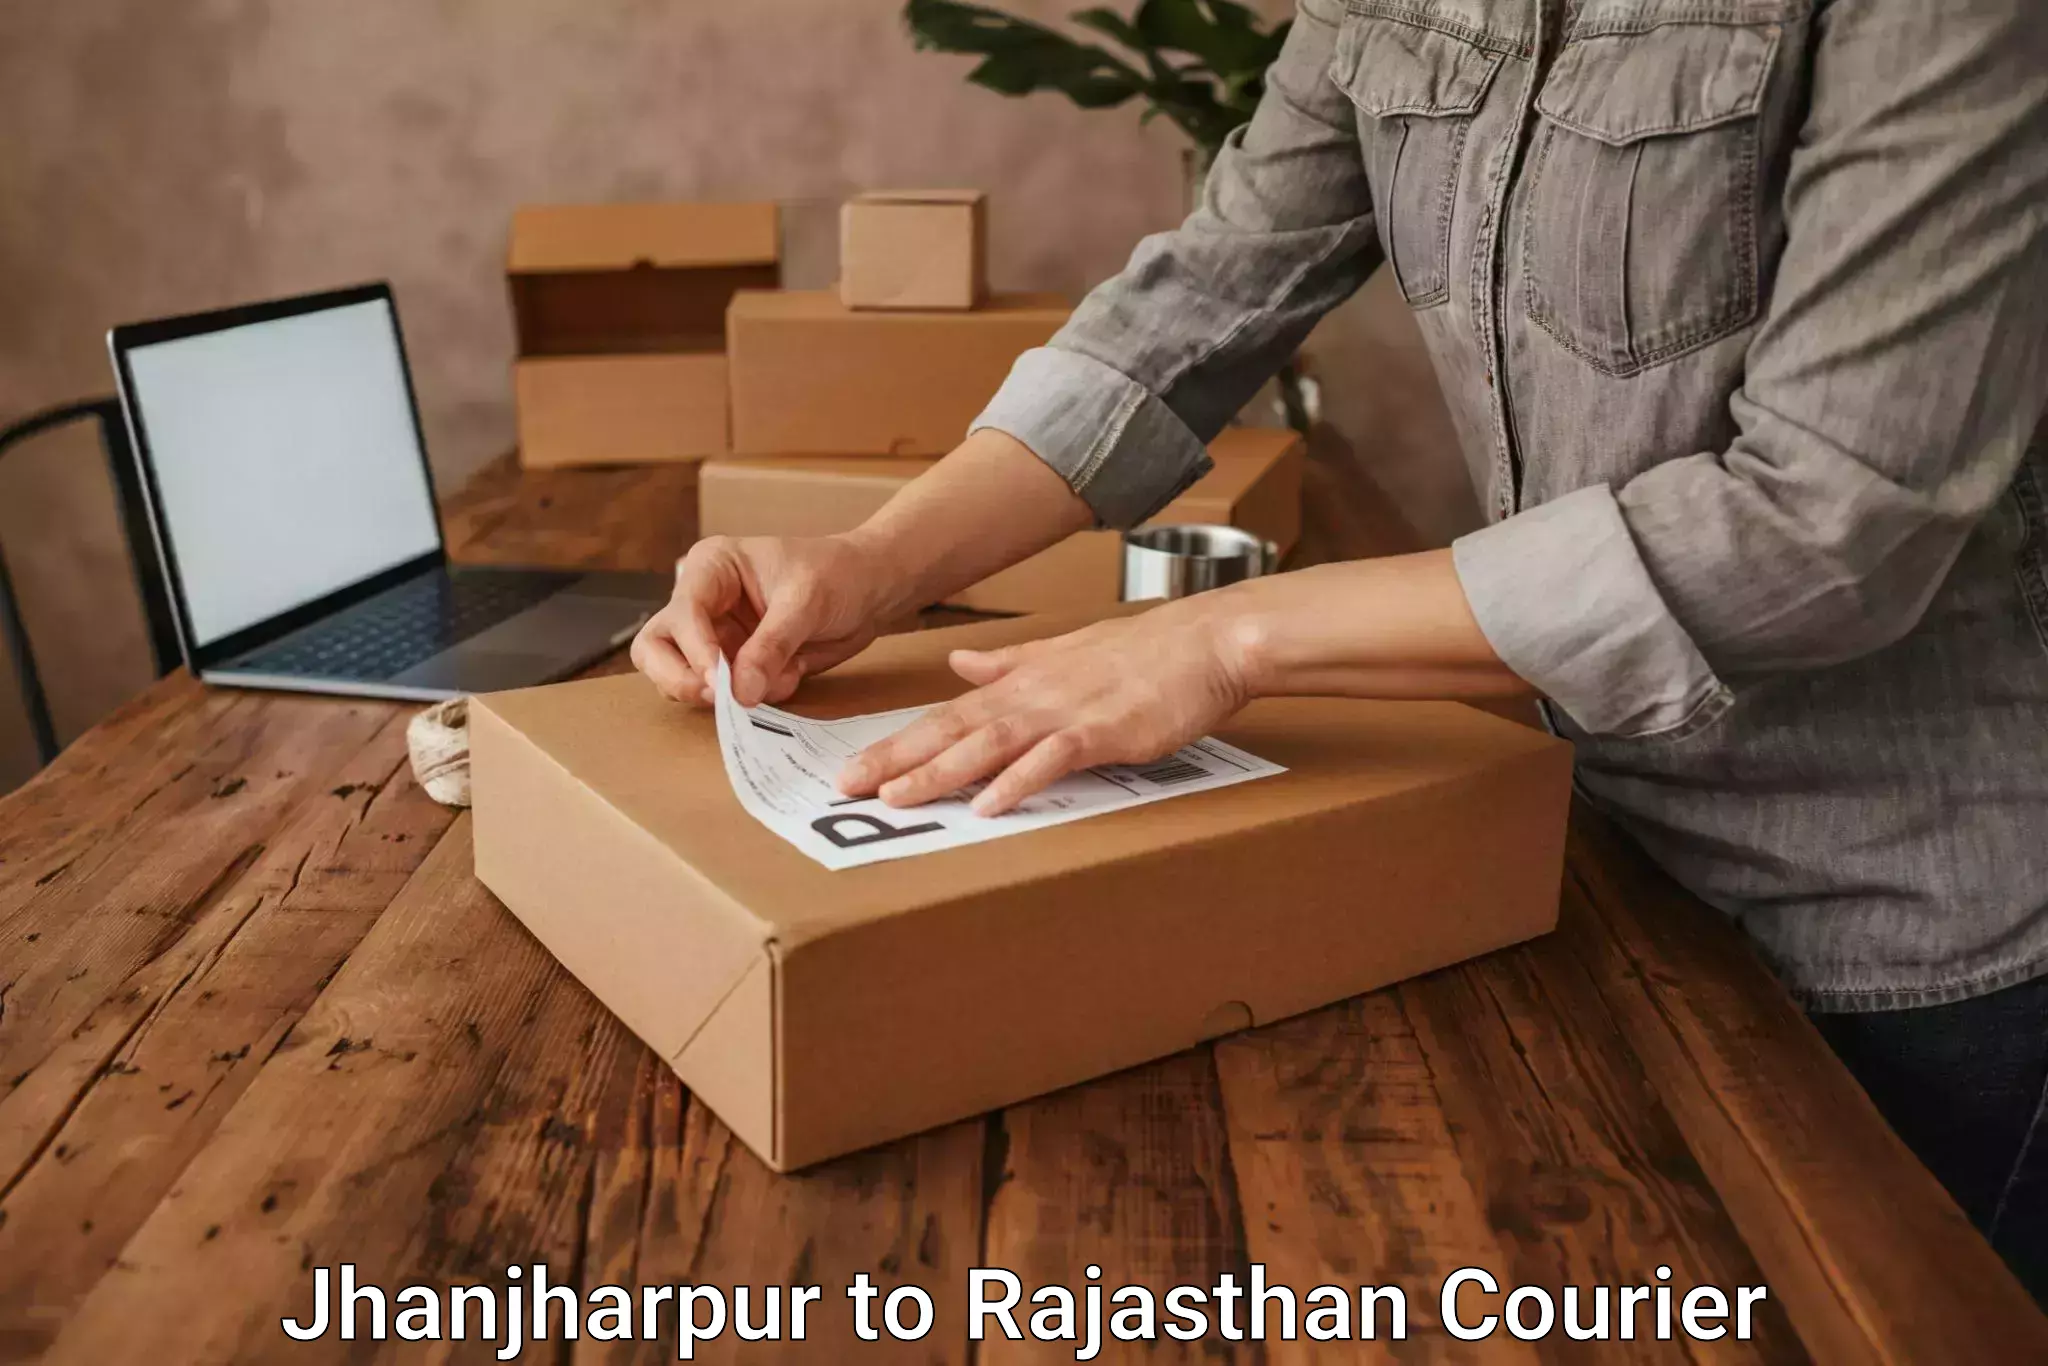 Furniture moving specialists Jhanjharpur to Rajasthan